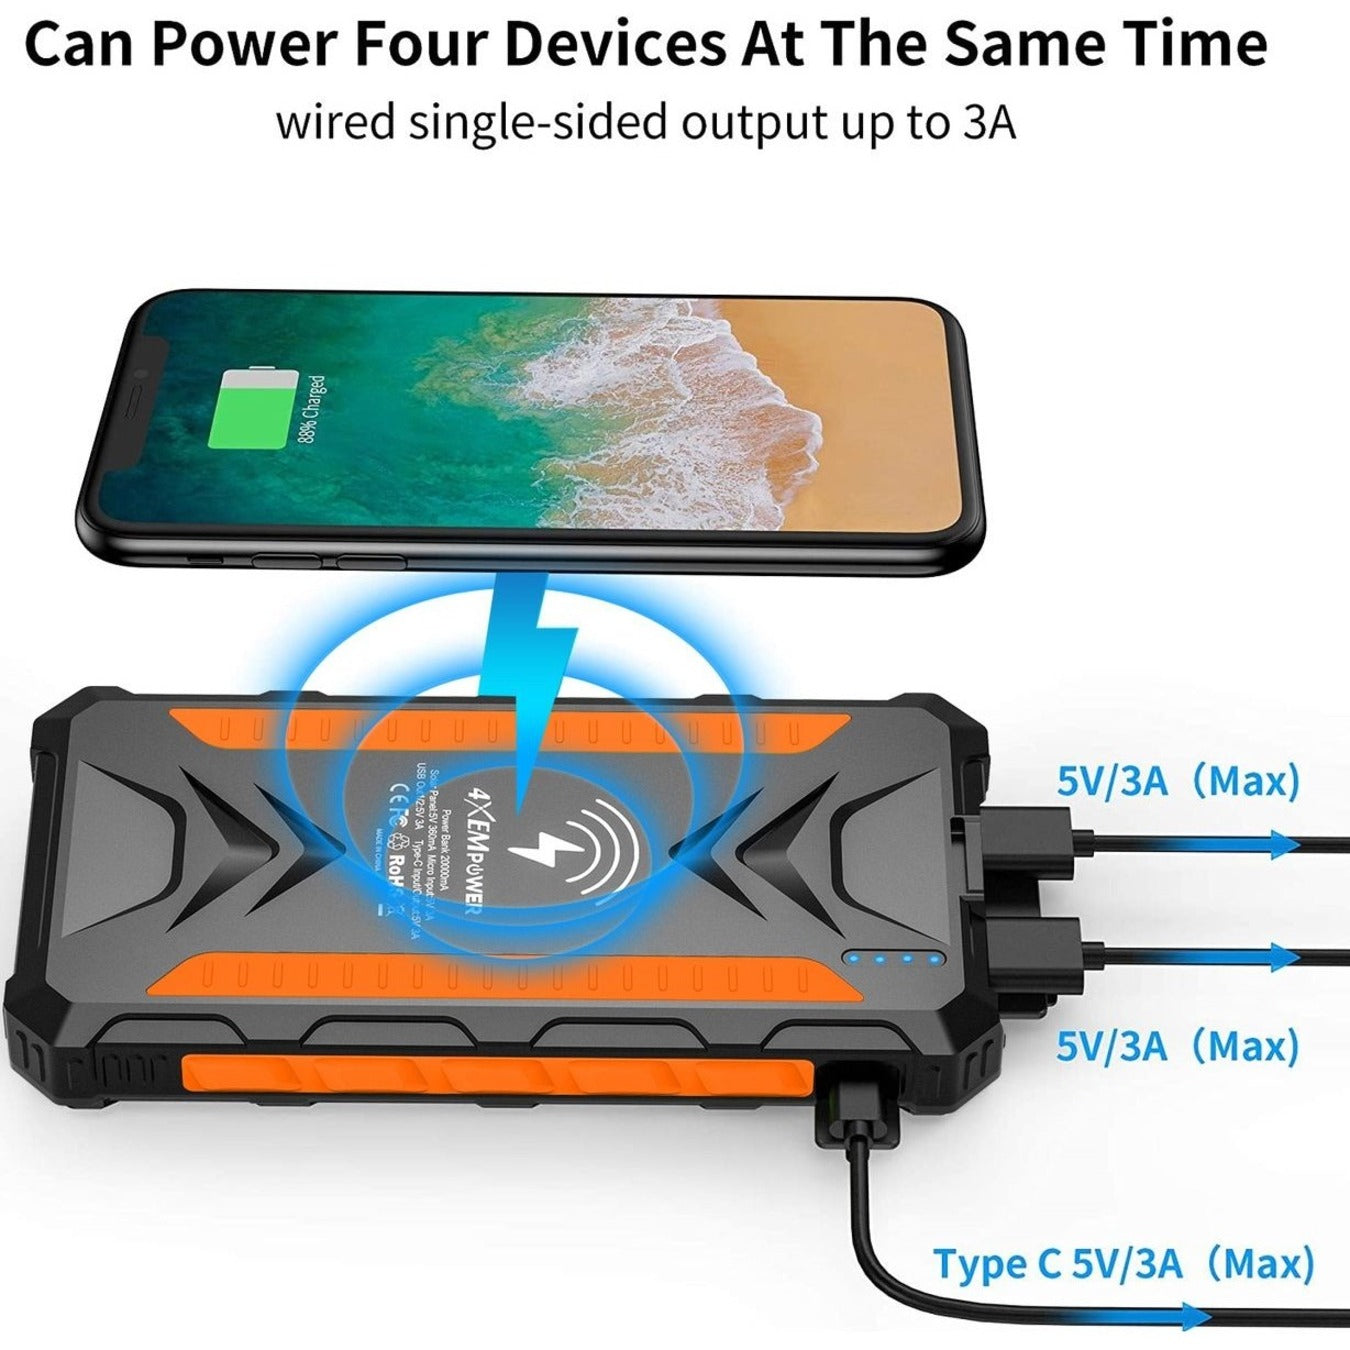 4XEM 4XSOLARPWROR Mobile Solar Charger (Orange), 20,000mAh Power Bank and Charger